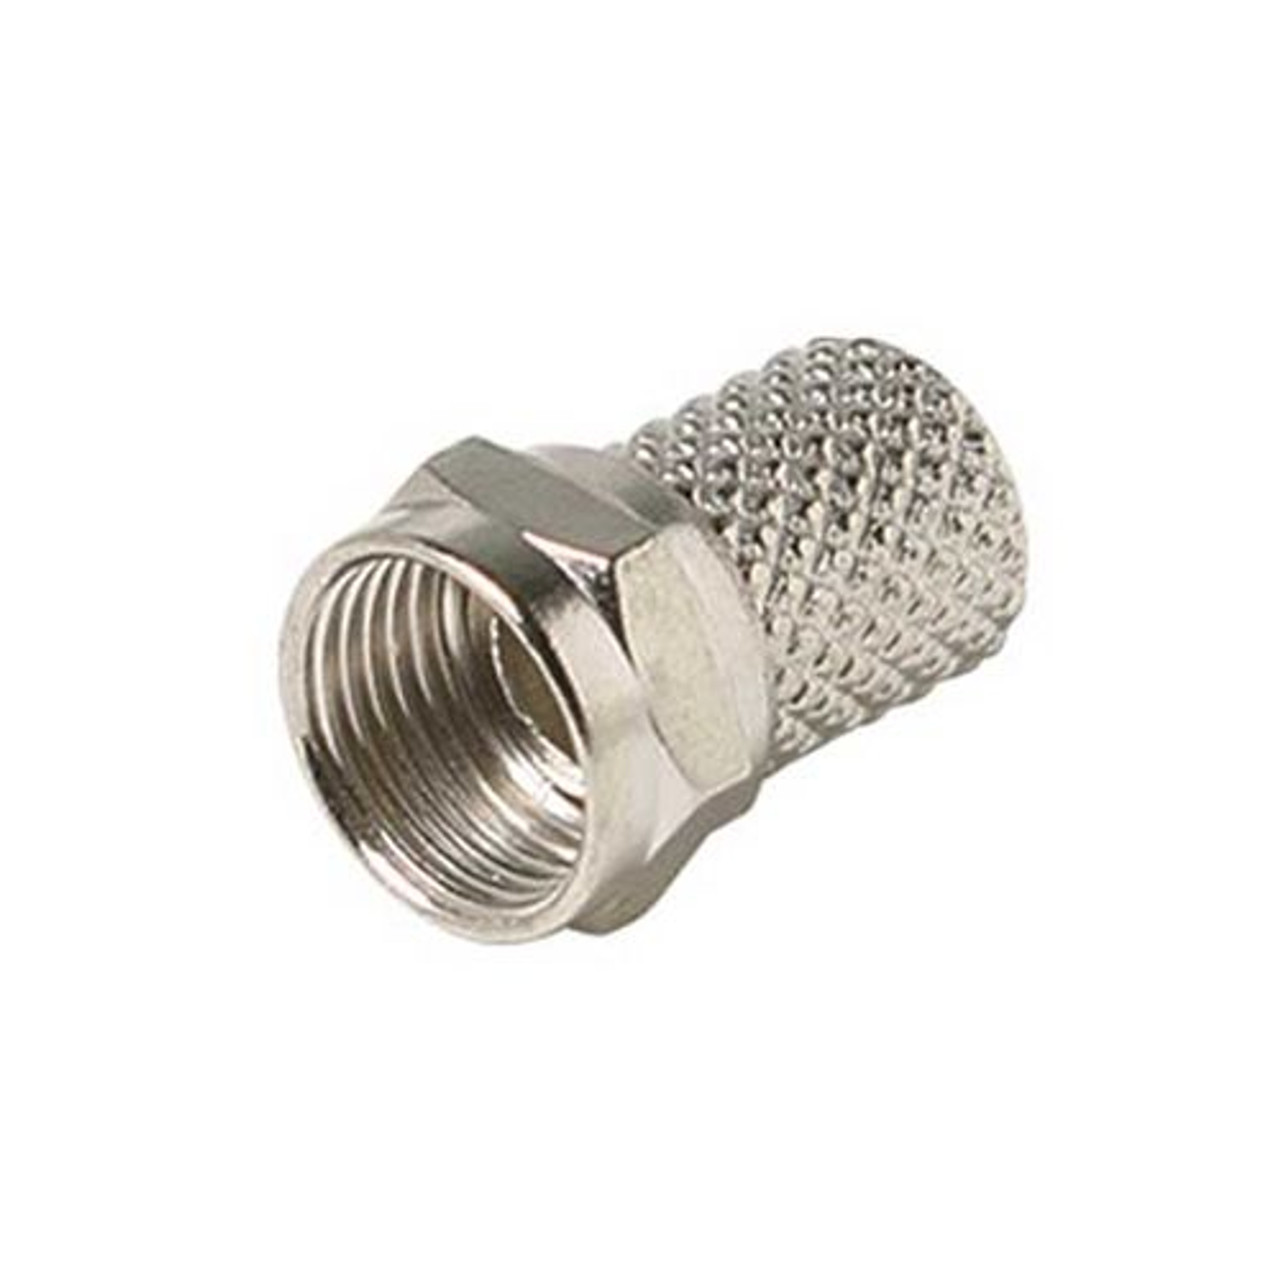 Eagle RG59 Twist-On F-Connector 100 Pack Nickel Plated RG-59 Coaxial Cable Connector 1 Pack Tool Less Antenna Video Data Signal Connectors